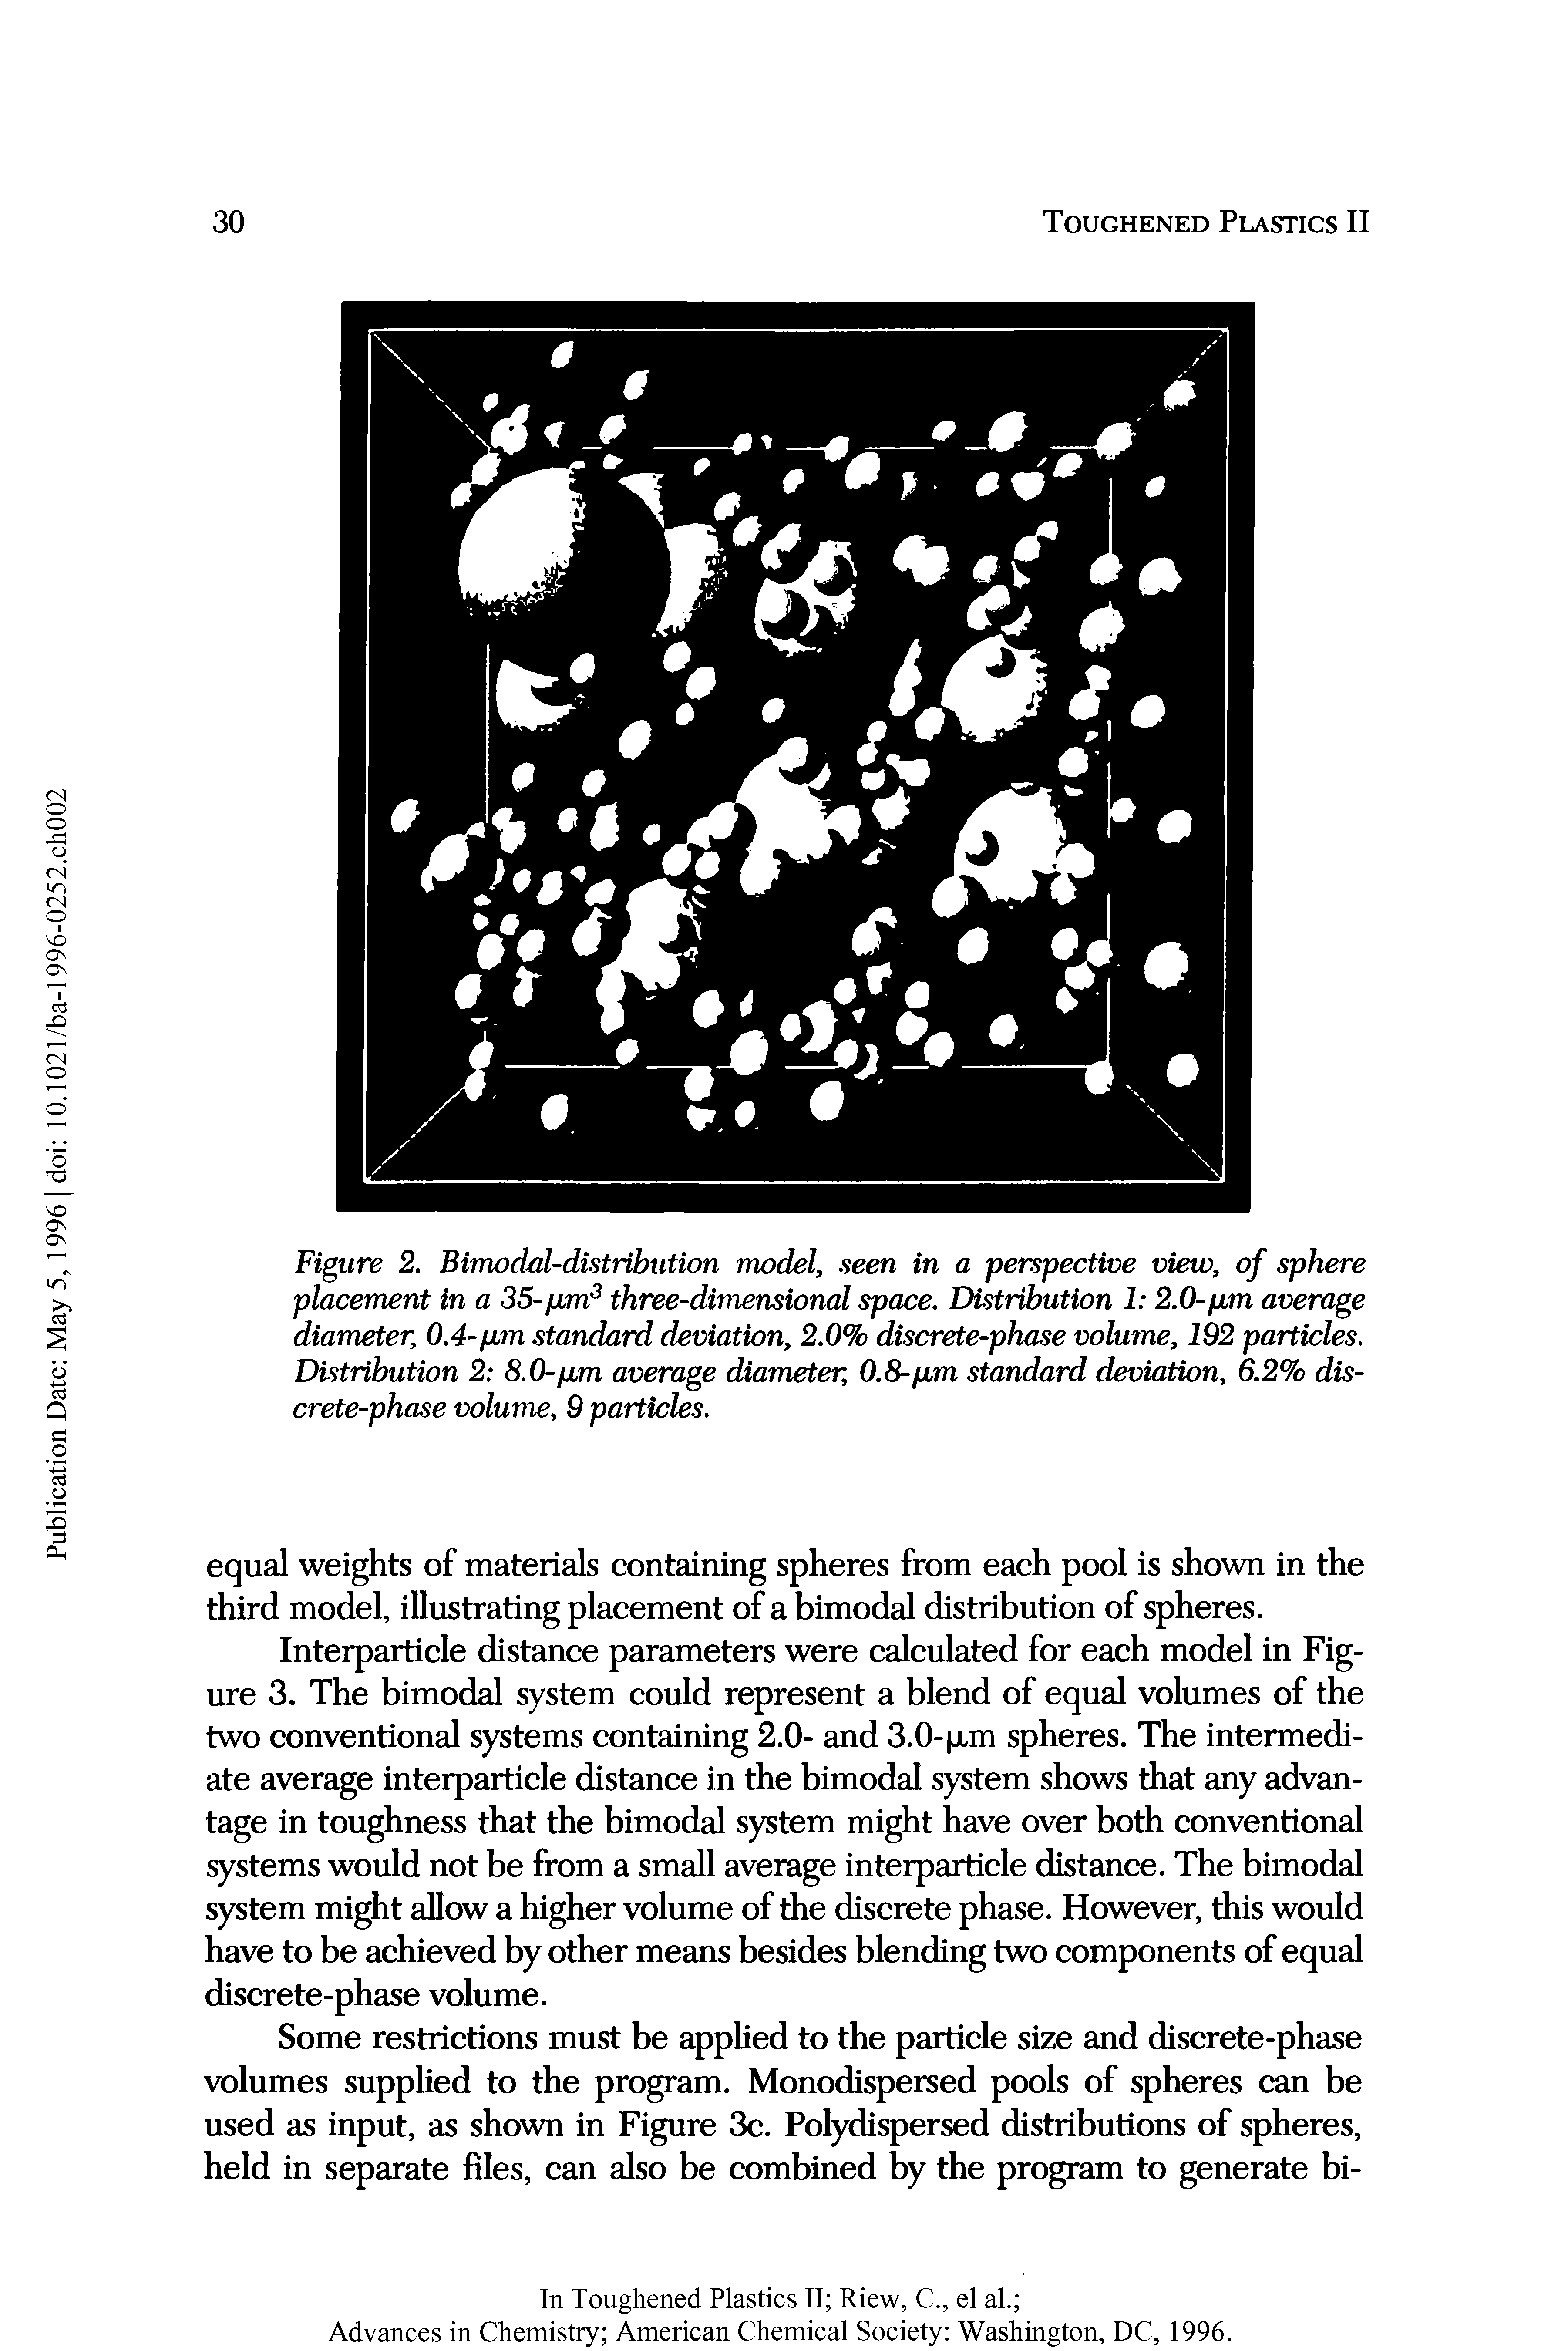 Figure 2. Bimodal-distribution model, seen in a perspective view, of sphere placement in a 35-pm3 three-dimensional space. Distribution 1 2.0-pm average diameter, 0.4-pm standard deviation, 2.0% discrete-phase volume, 192 particles. Distribution 2 8.0-pm average diameter, 0.8-pm standard deviation, 6.2% discrete-phase volume, 9 particles.